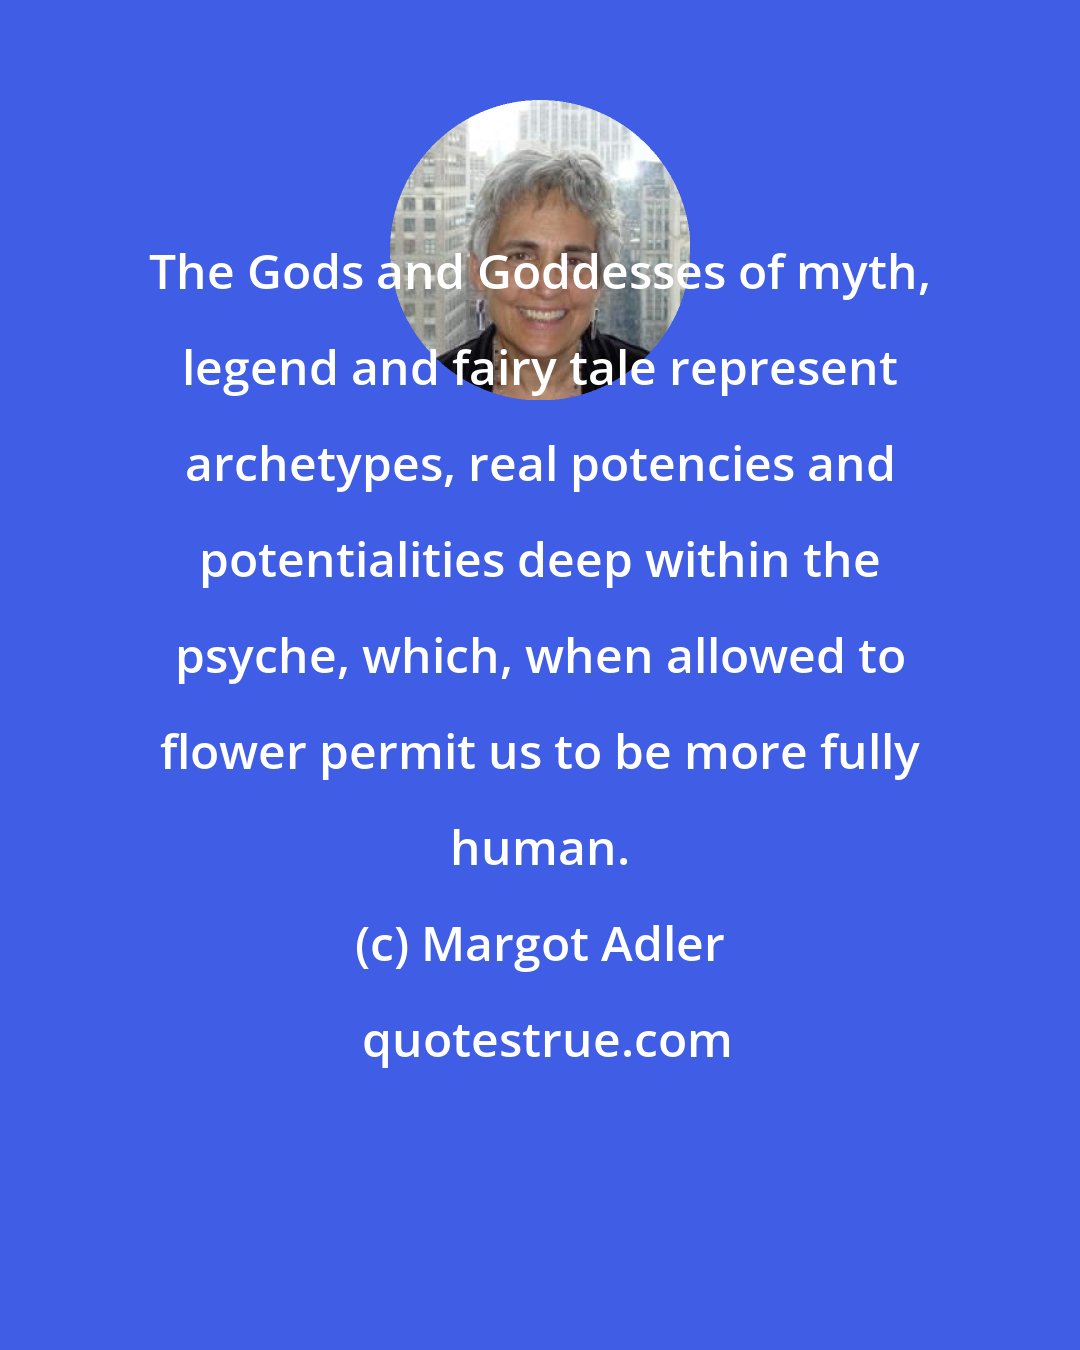 Margot Adler: The Gods and Goddesses of myth, legend and fairy tale represent archetypes, real potencies and potentialities deep within the psyche, which, when allowed to flower permit us to be more fully human.